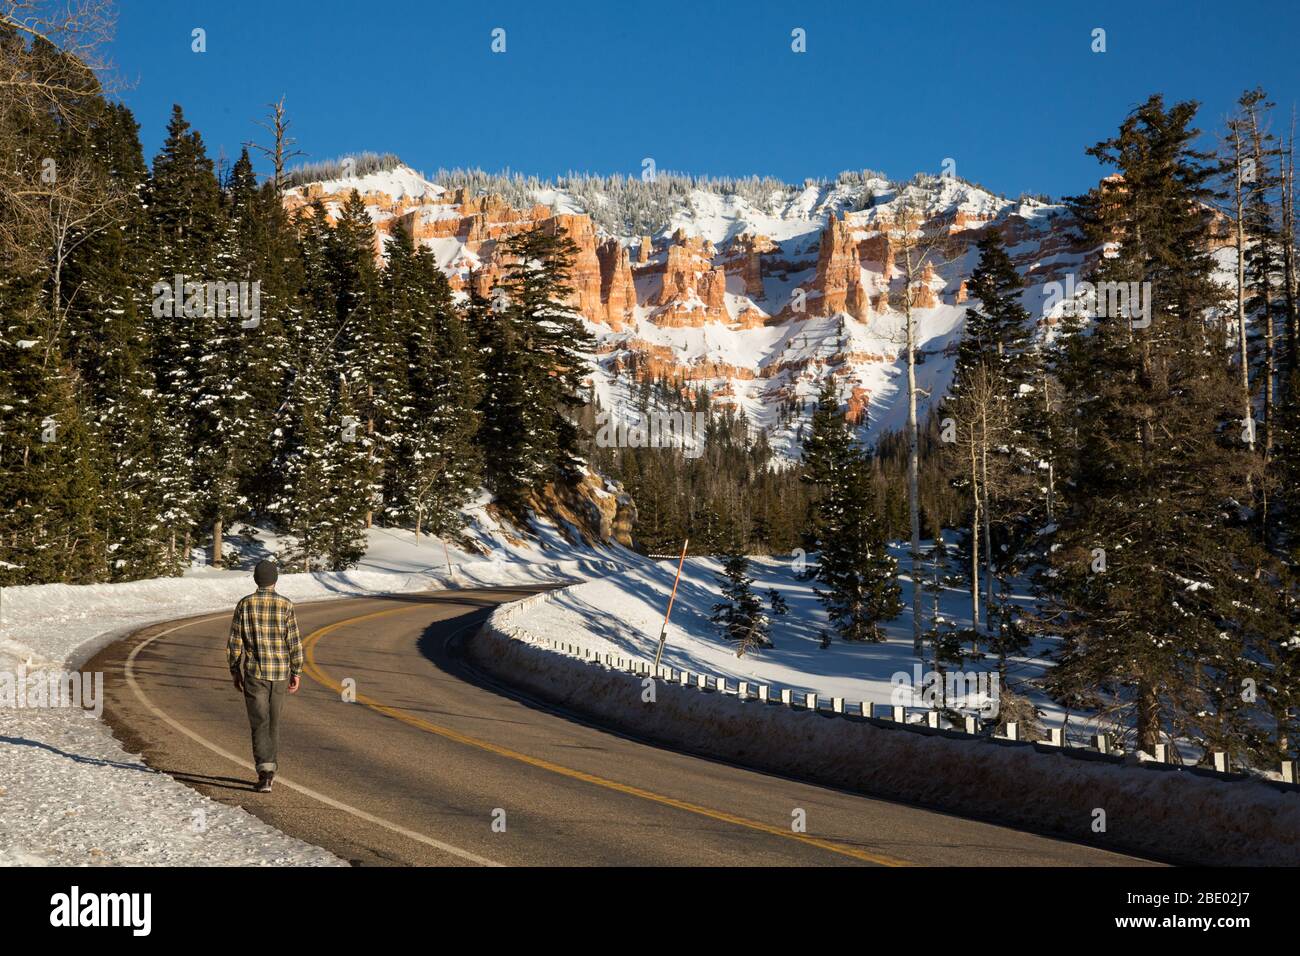 Man walking beside a two-lane road in the winter. Overhead are desert rock formations covered in snow. Stock Photo